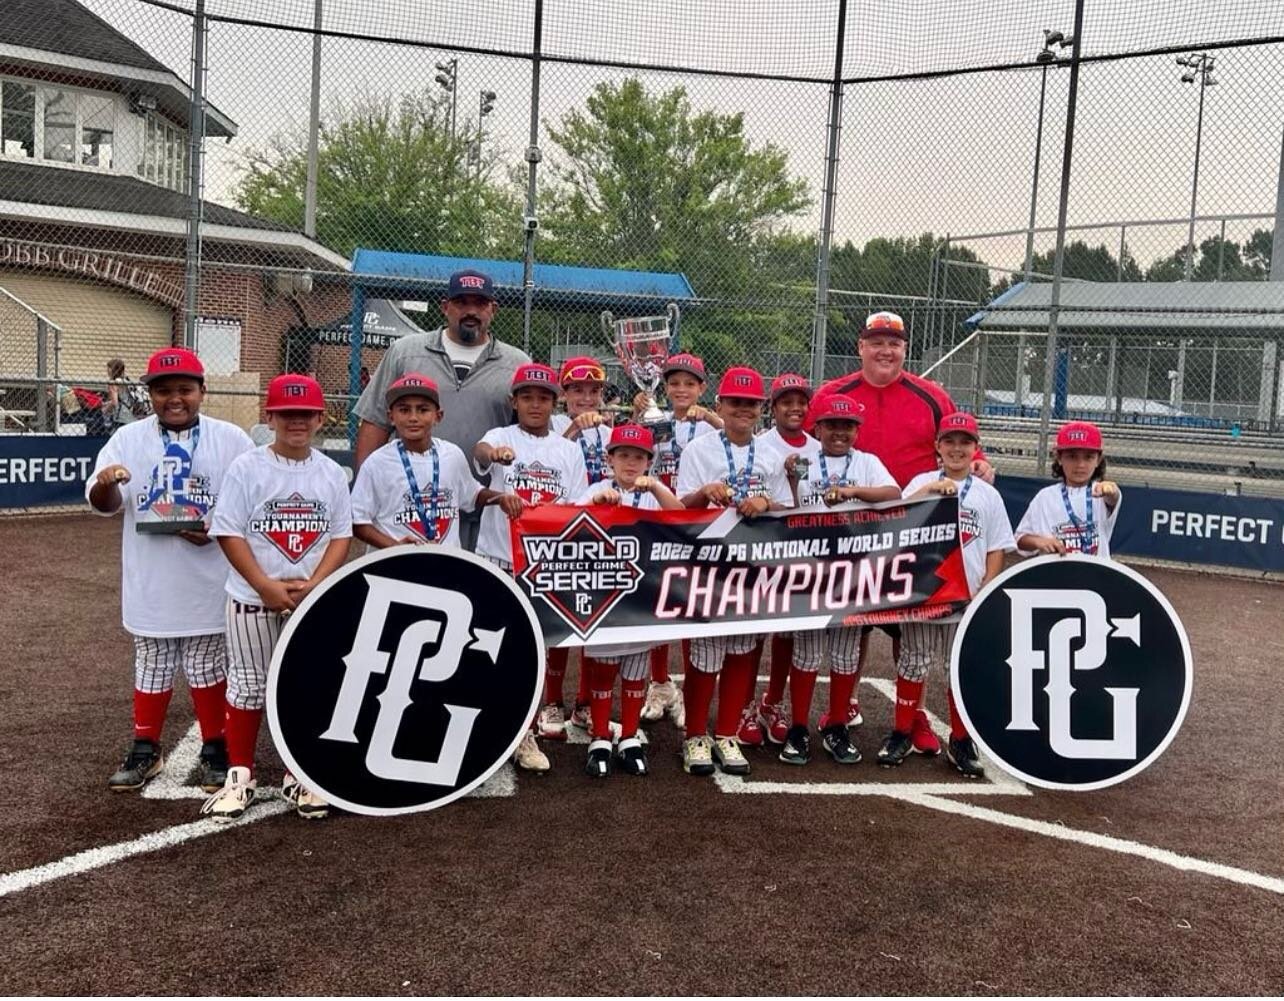 TBT National 9U went to Georgia to play in the PG National World Series and absolutely dominated. 46 teams from all over the US. LAST ONES STANDING 🏆🏆🏆🏆